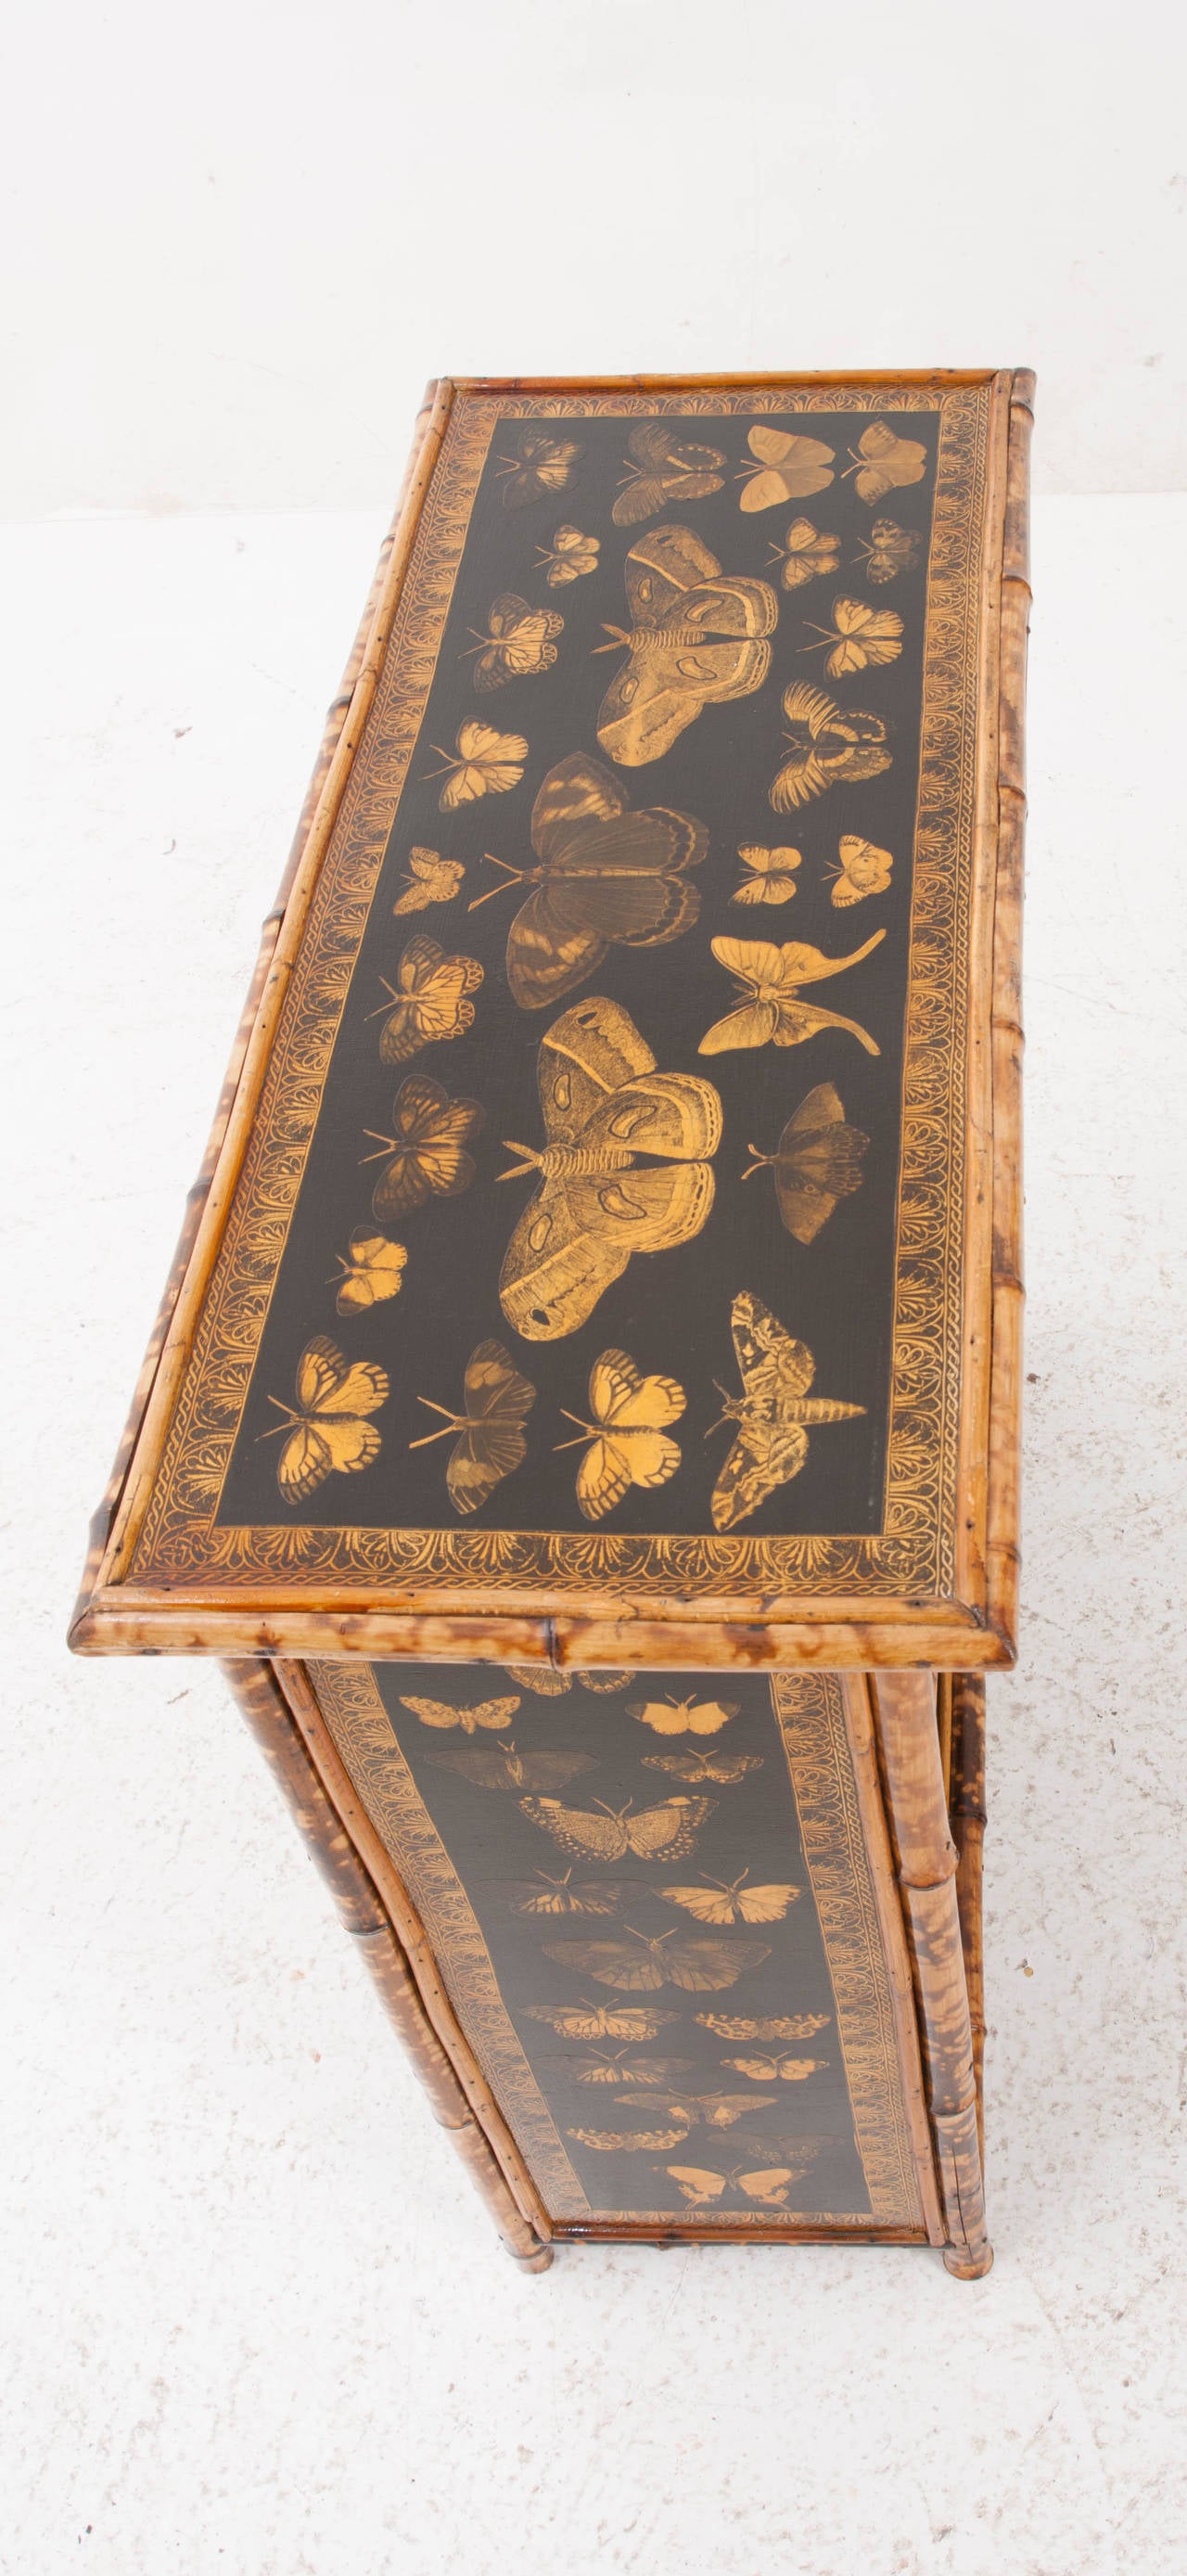 English bamboo bookshelf from the 1890's has been recently refinished. Where you see black paint and decoupage is where seagrass would have been. The seagrass has been damaged and replaced with this fabulous butterfly decoupage and interesting